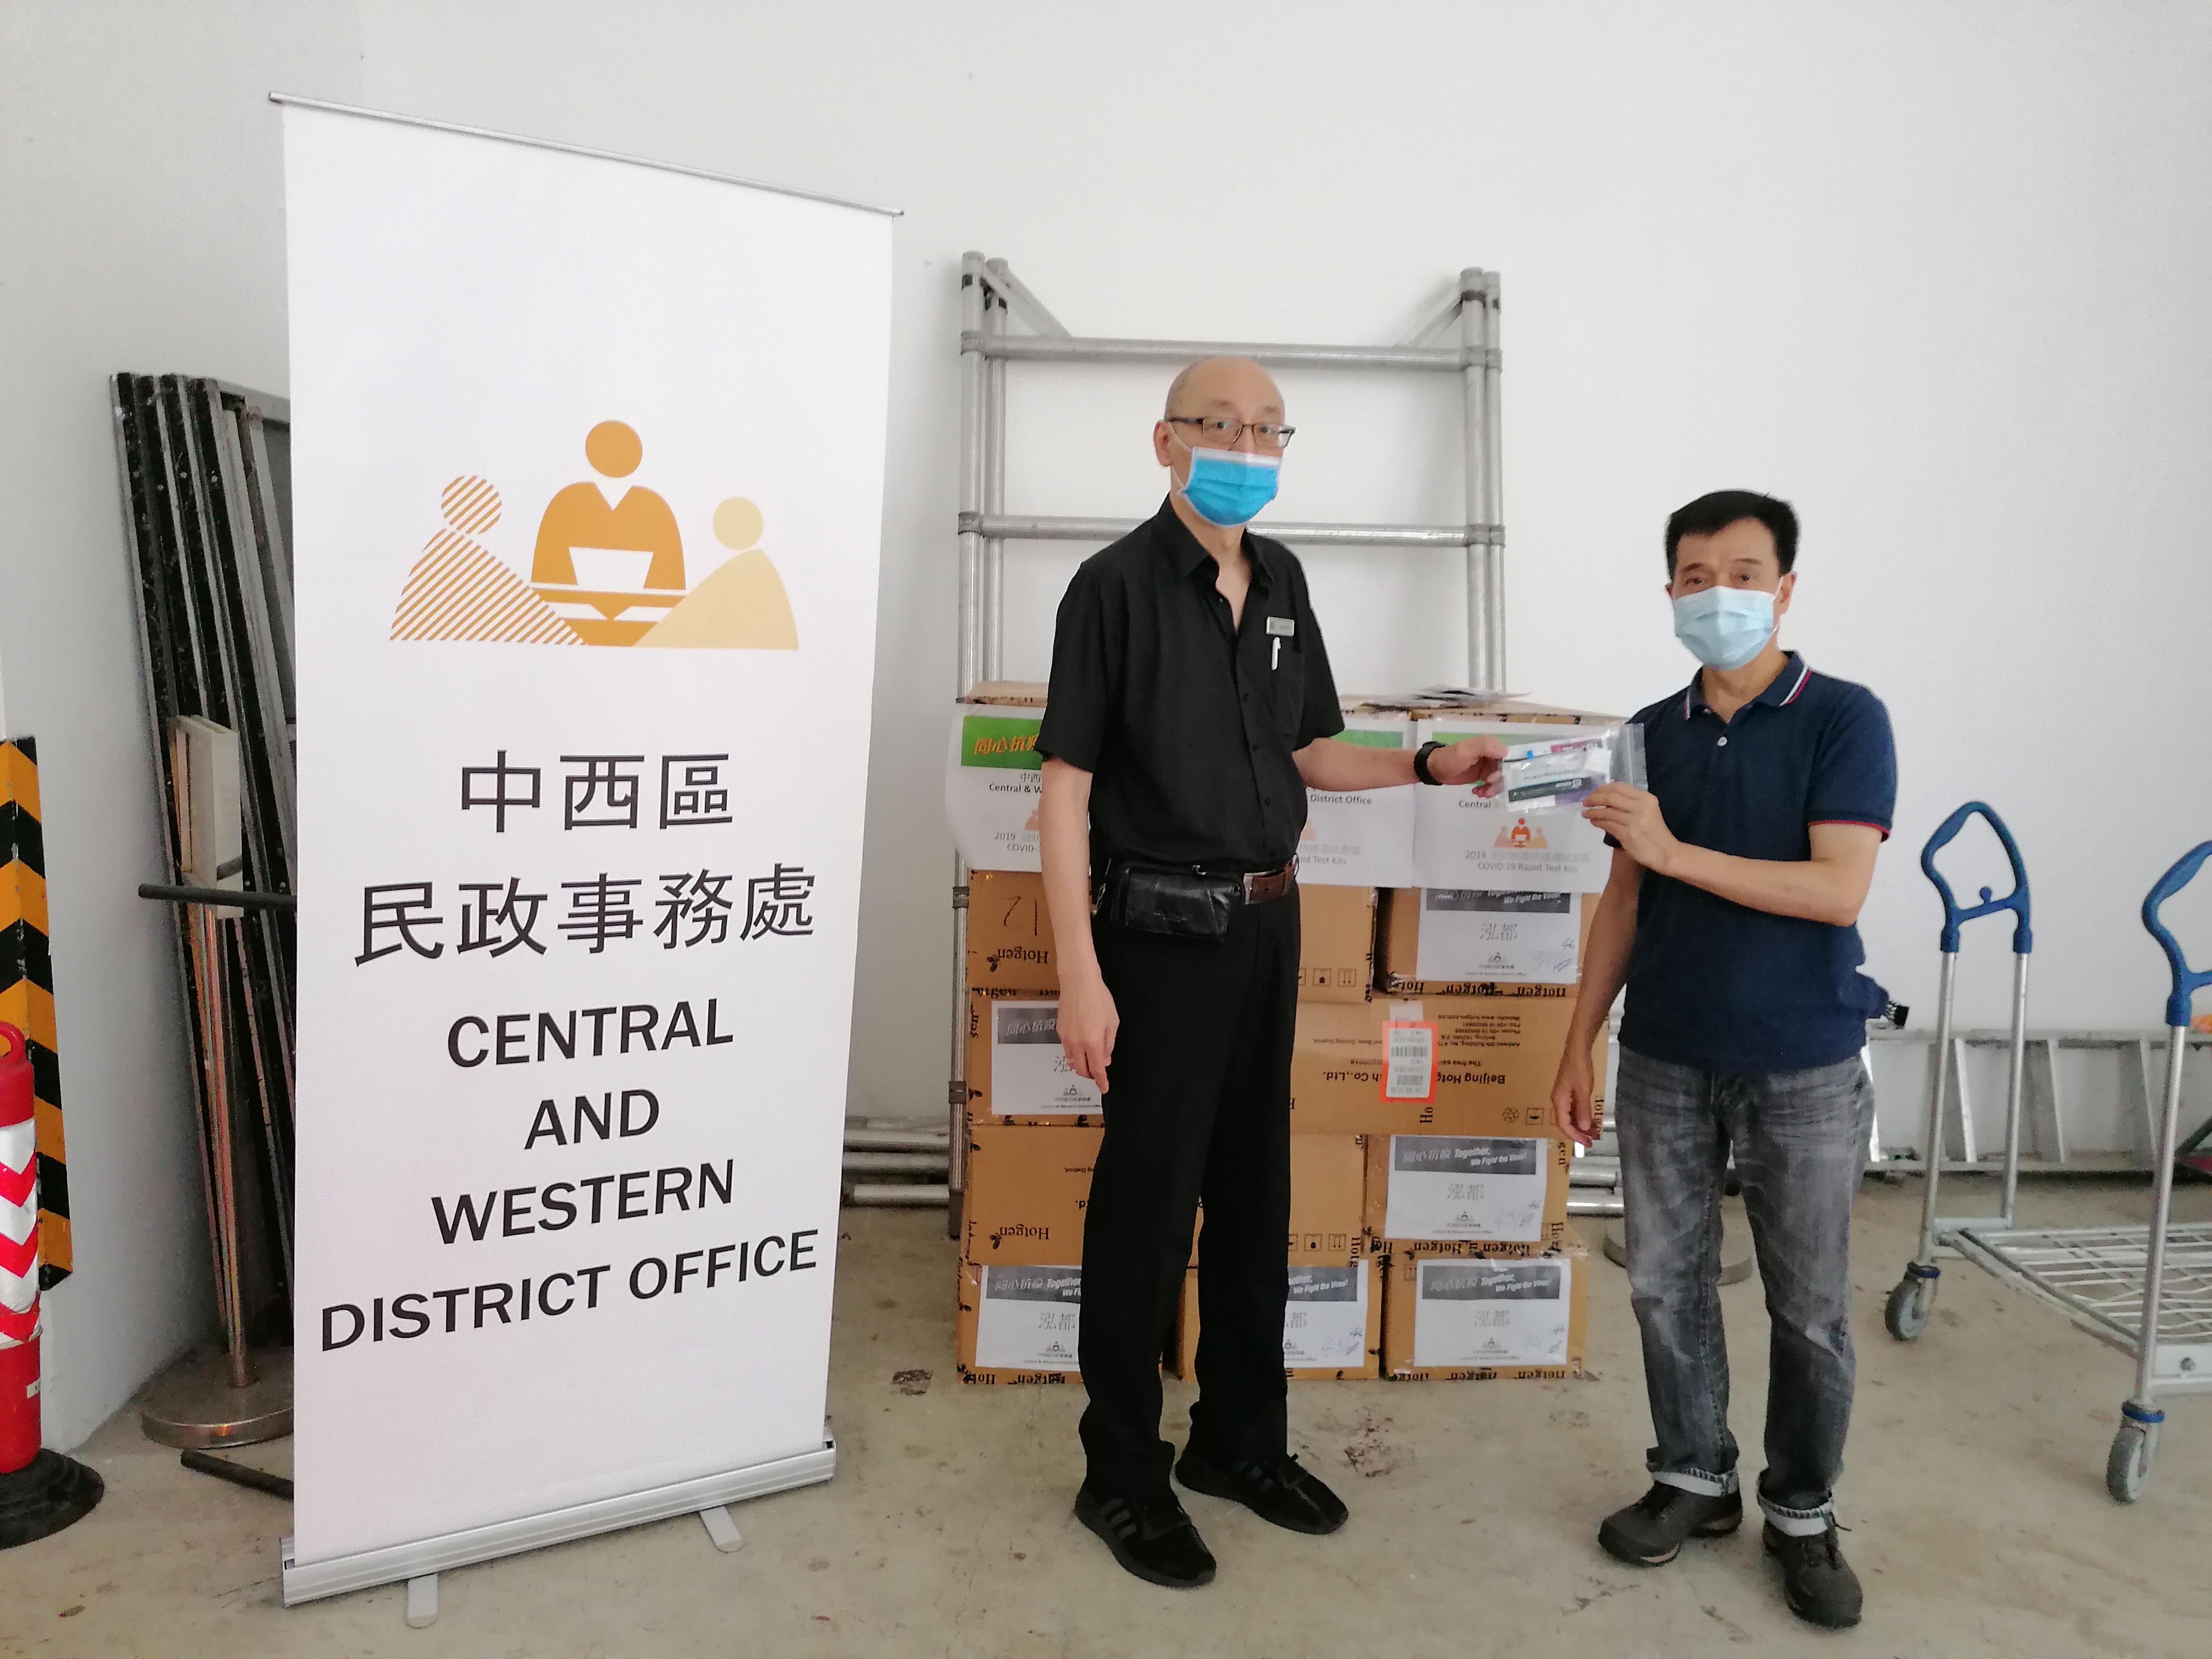 The Central and Western District Office today (May 14) distributed COVID-19 rapid test kits to households, cleansing workers and property management staff living and working in Block 1, The Merton for voluntary testing through the property management company.
